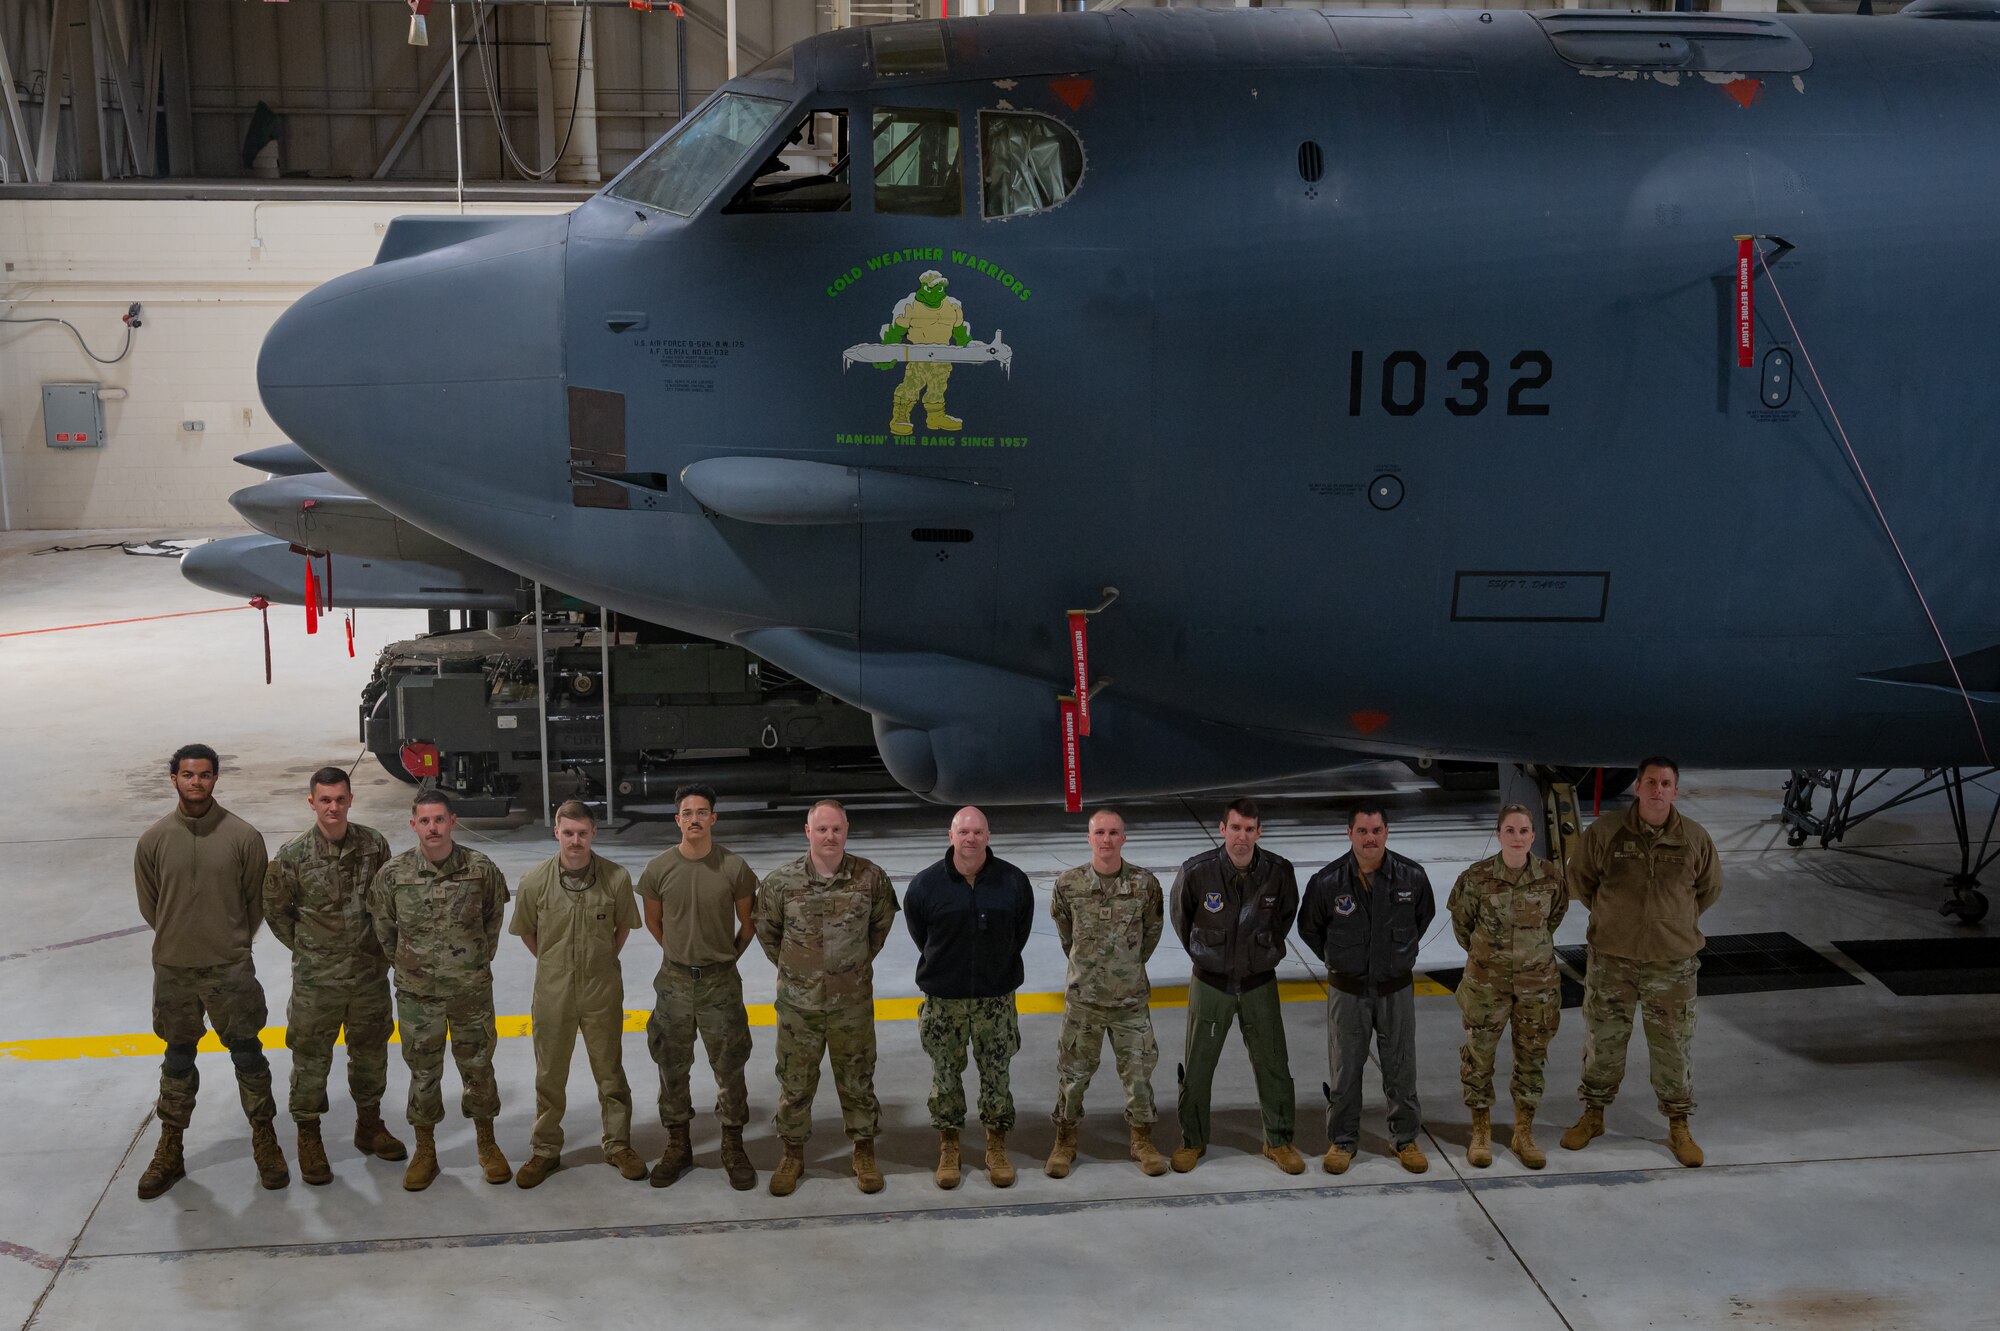 Rear Adm. Robert Wirth, J5N, U.S. Strategic Command deputy director, strategic targeting and nuclear mission planning, poses for a group photo with members of the 5th Bomb Wing at Minot Air Force Base, North Dakota, Nov. 29, 2023. Wirth visited the 5th Bomb Wing to meet with wing leaders and interact with Airmen. (U.S. Air Force photo by Airman 1st Class Alexander Nottingham)